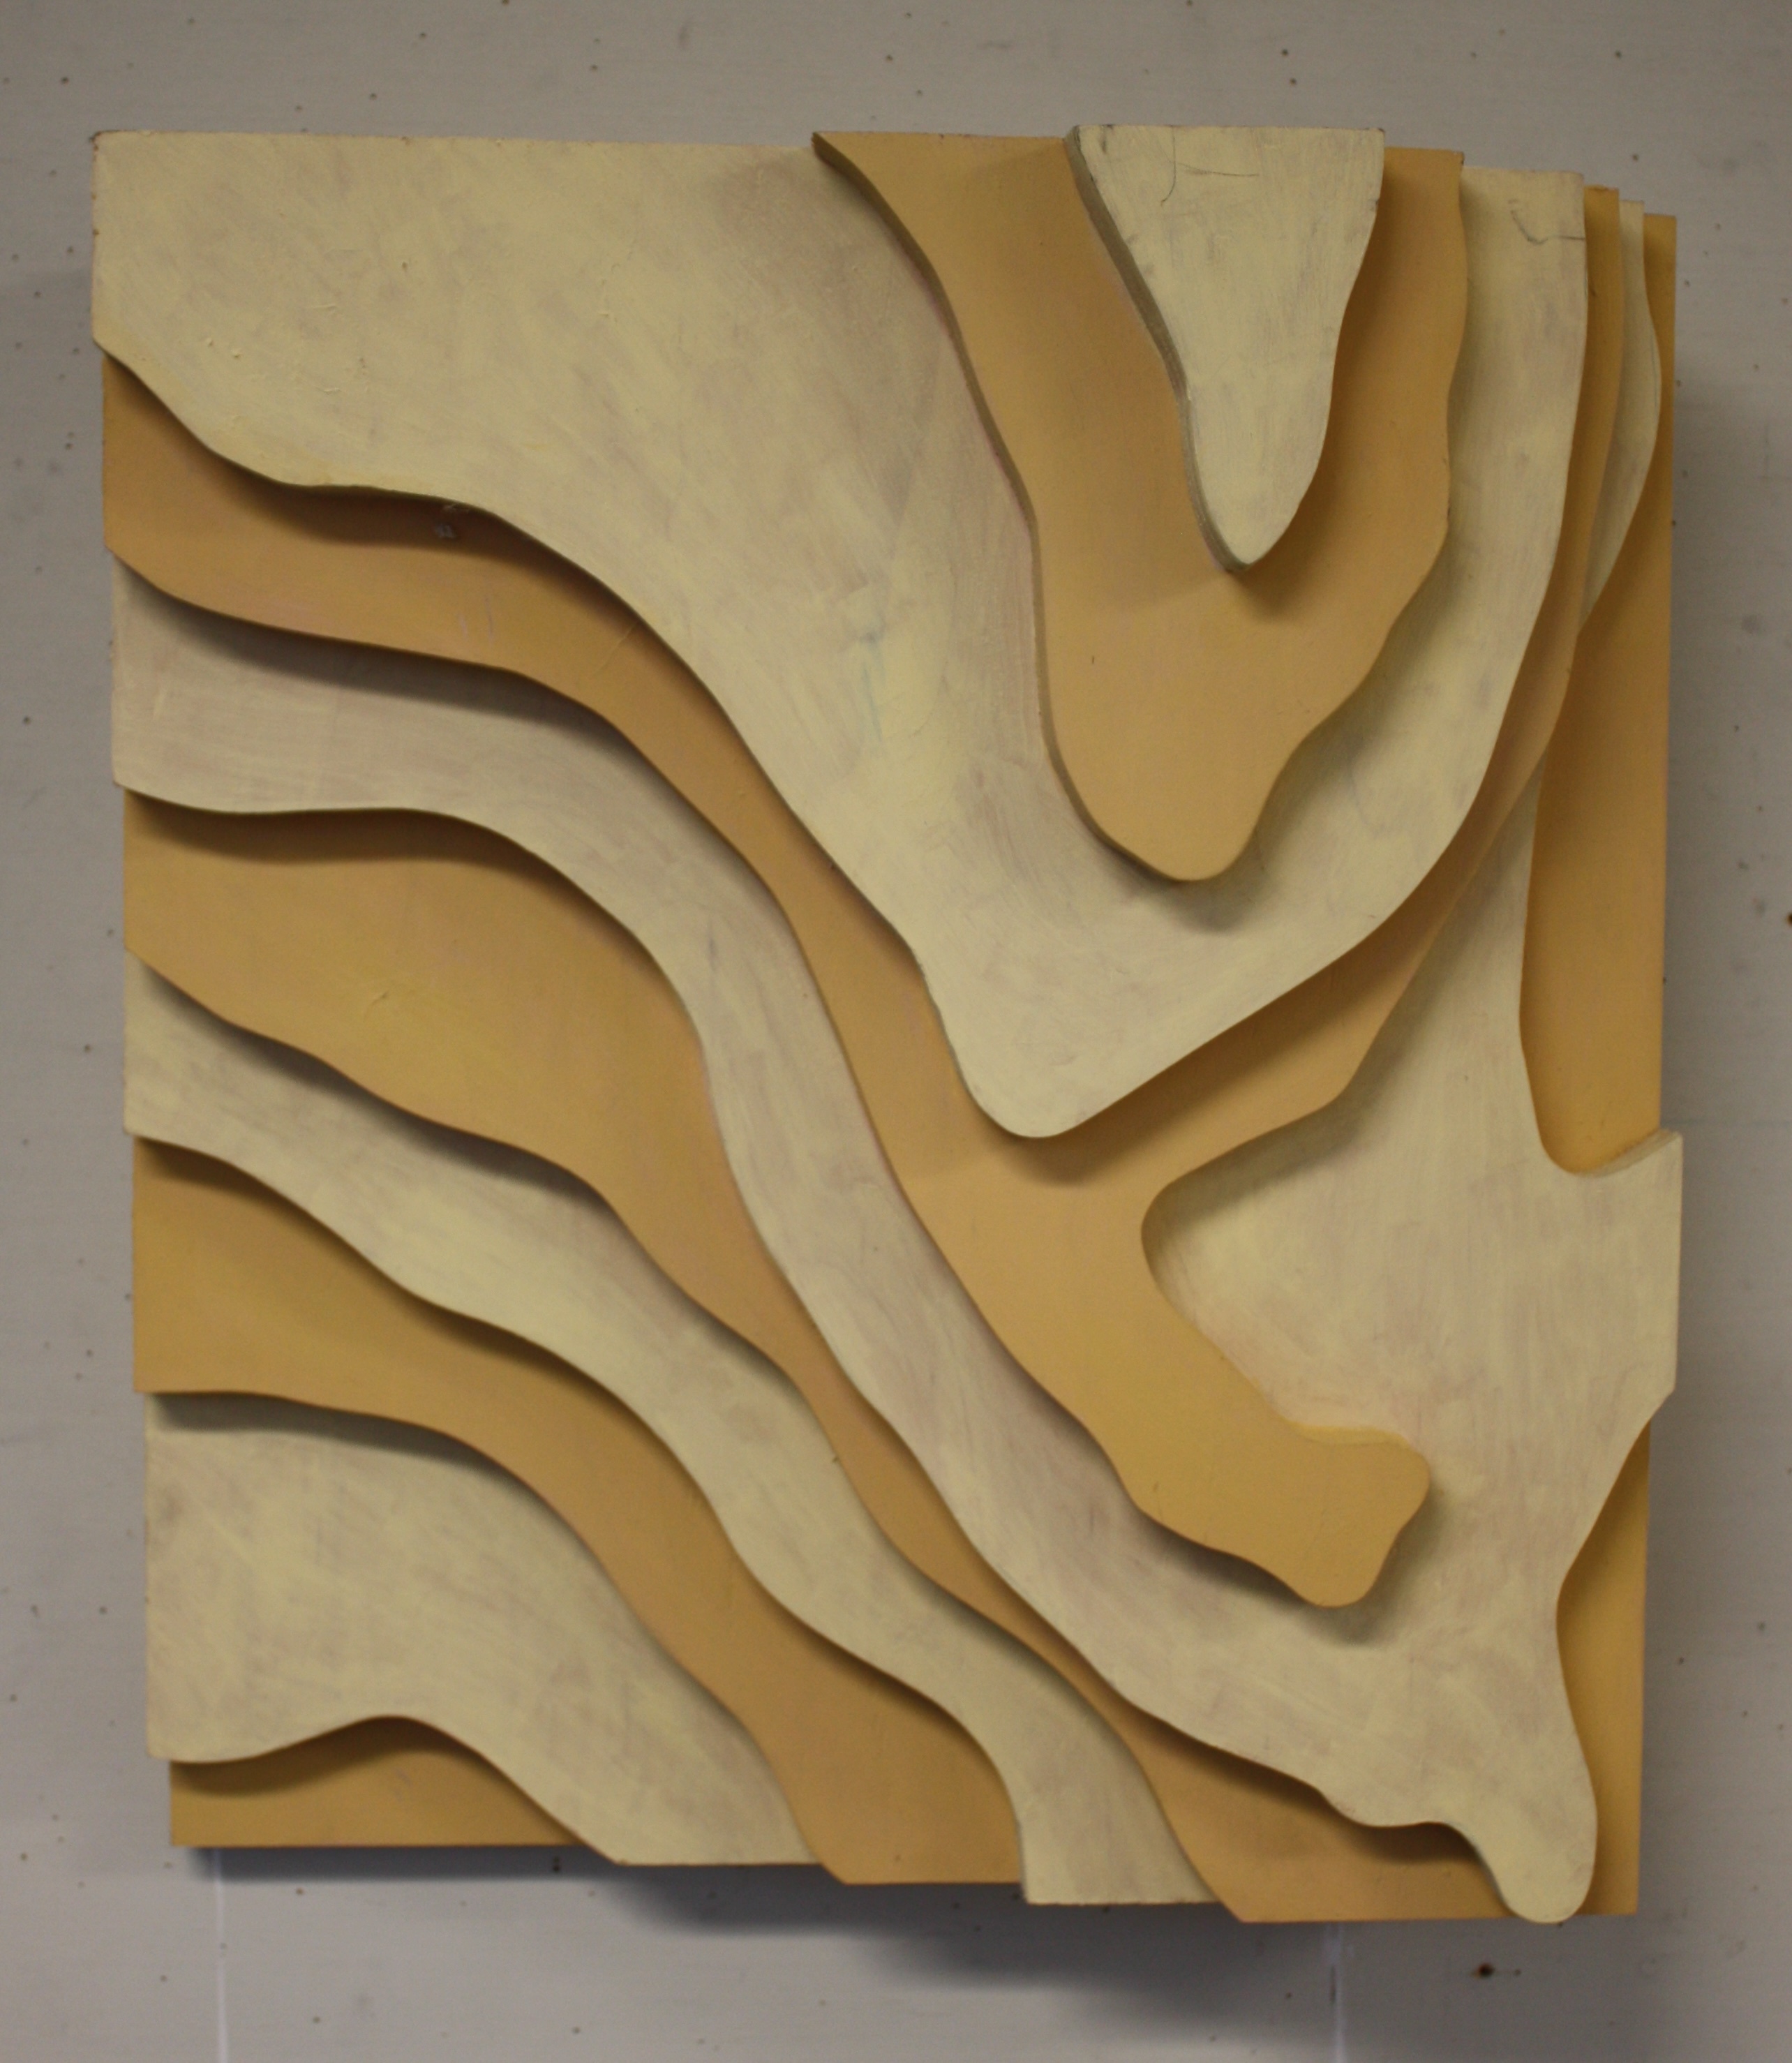 Joe Letitia, Kaaterskill Falls after Thomas Cole, panels 1 and 2, elevation 3D sketch, 1995, oil on laminated birch plywood, 16” x 18” x 8” (derived from topographic map of area Thomas Cole painted – top panel are the elevation lines in between those in the bottom panel)